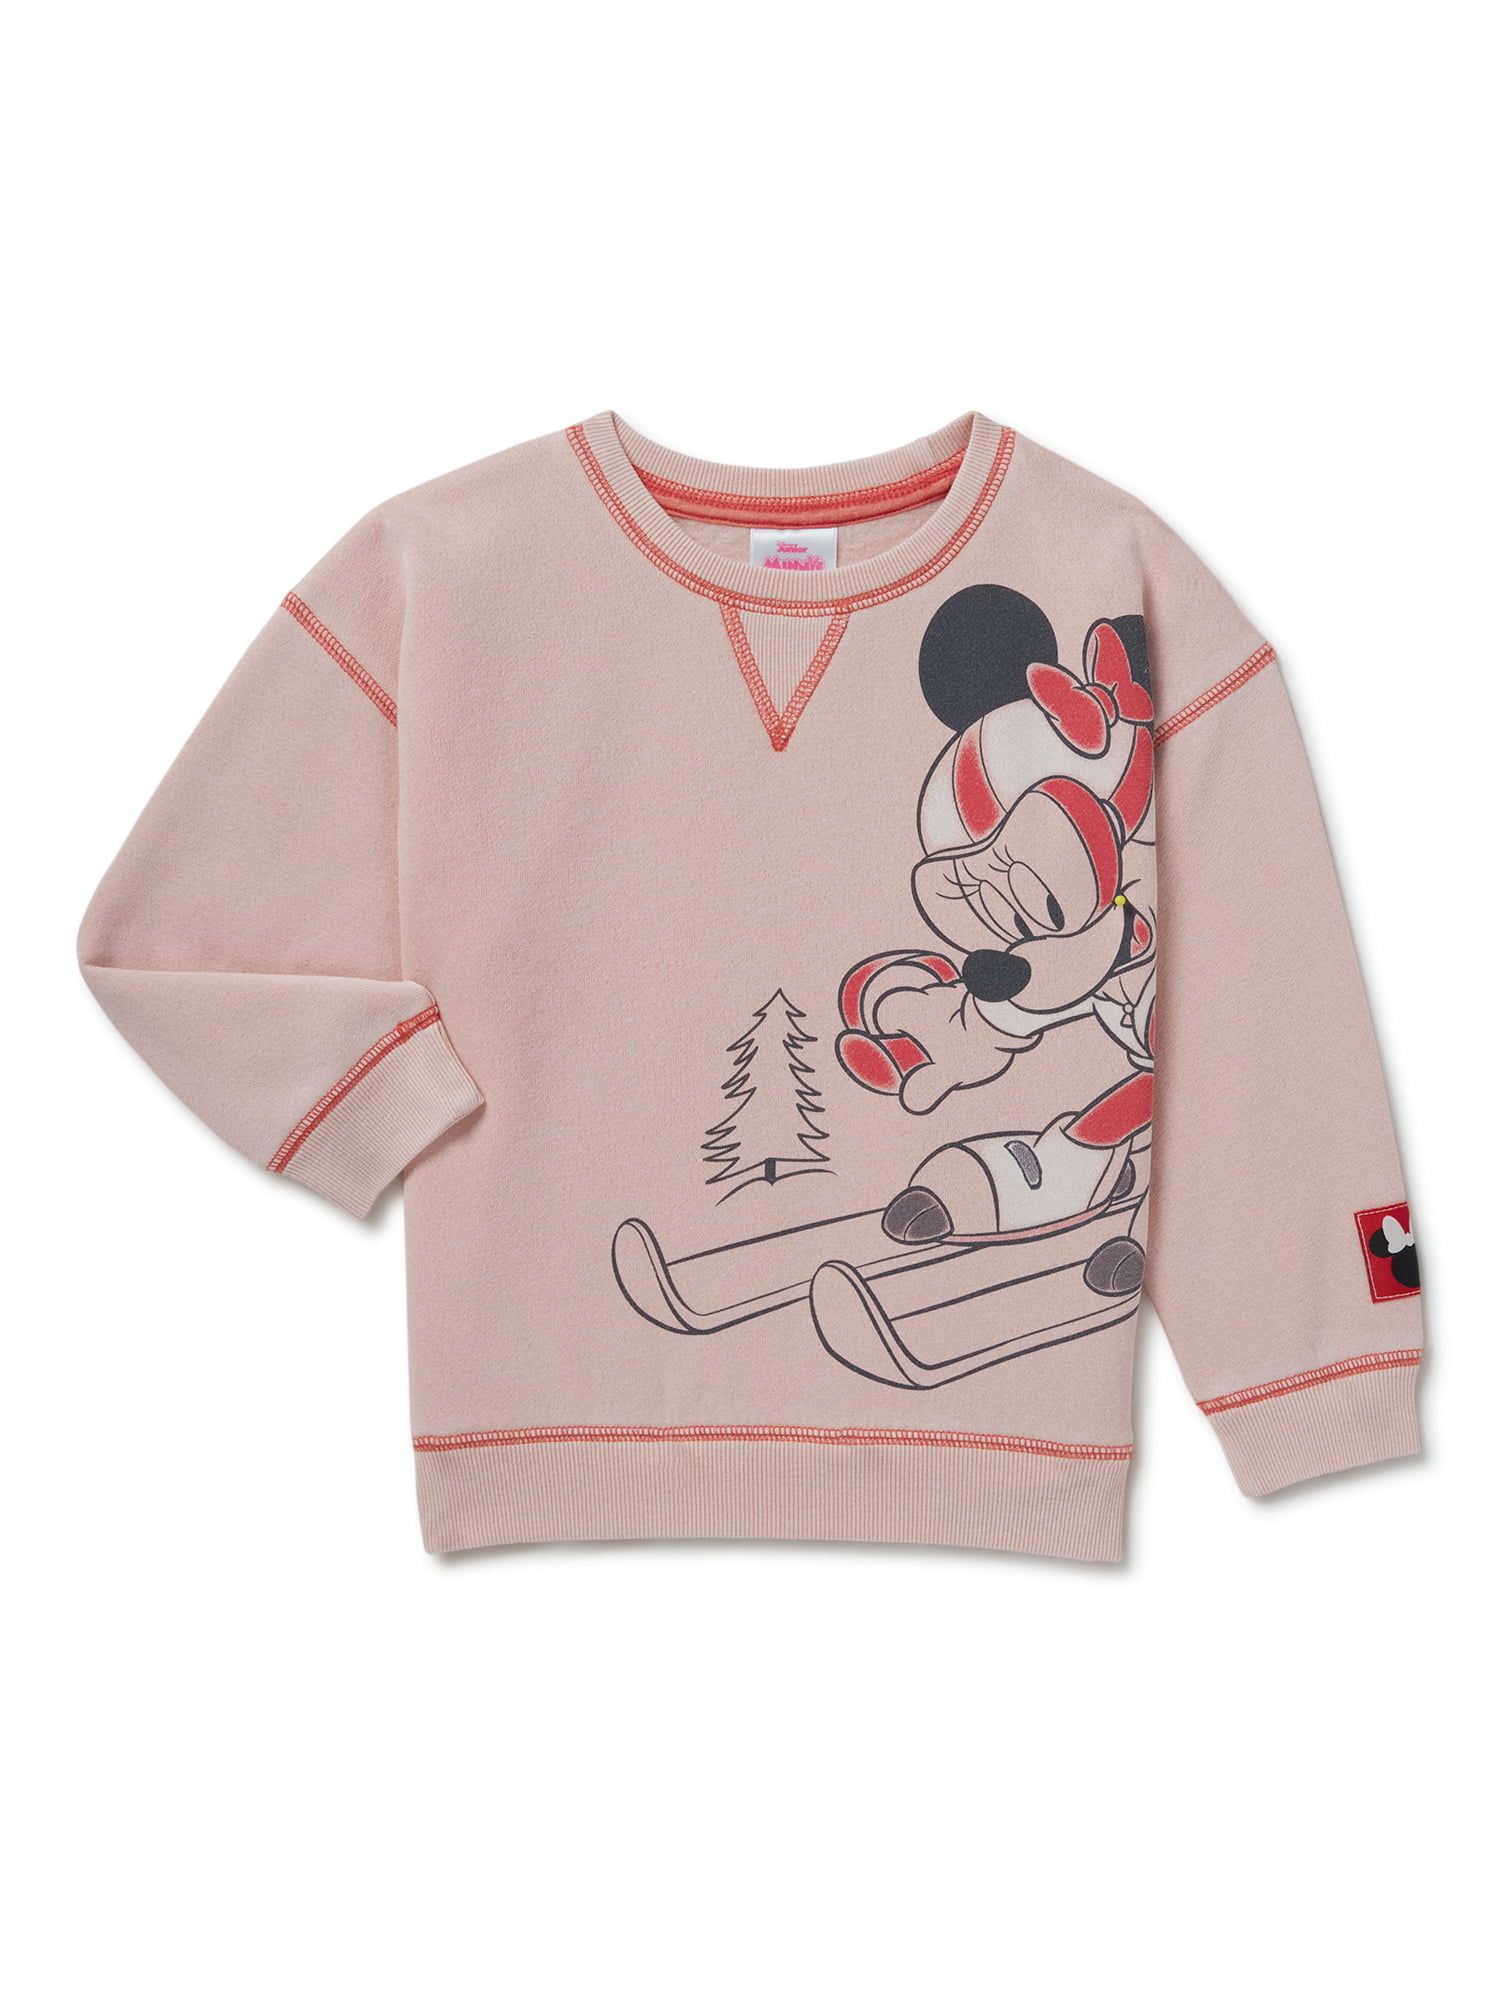 Minnie Mouse Baby and Toddler Girl Crewneck Sweatshirt, Sizes 12 Months-5T | Walmart (US)